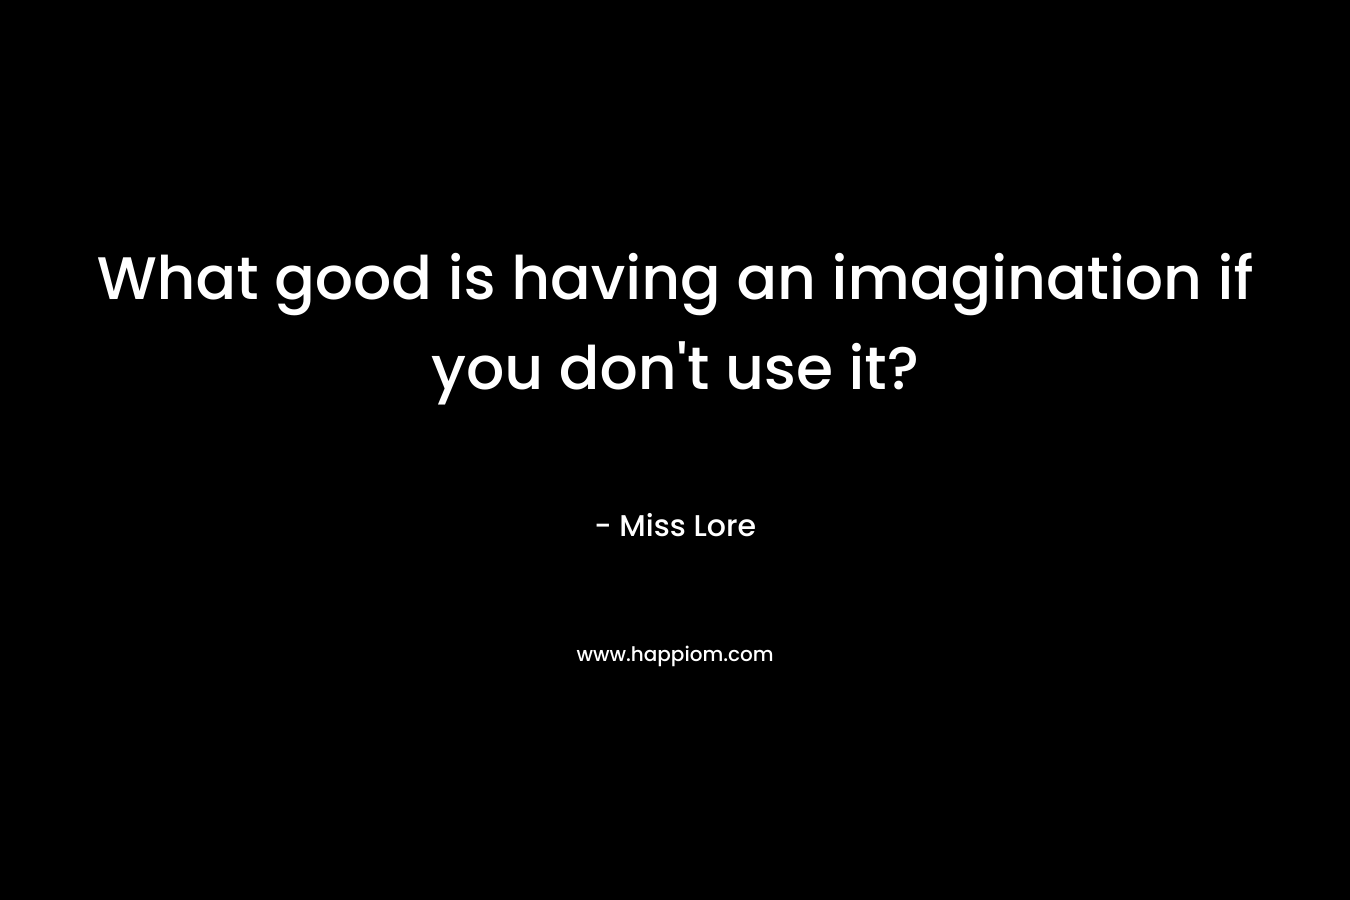 What good is having an imagination if you don’t use it? – Miss Lore